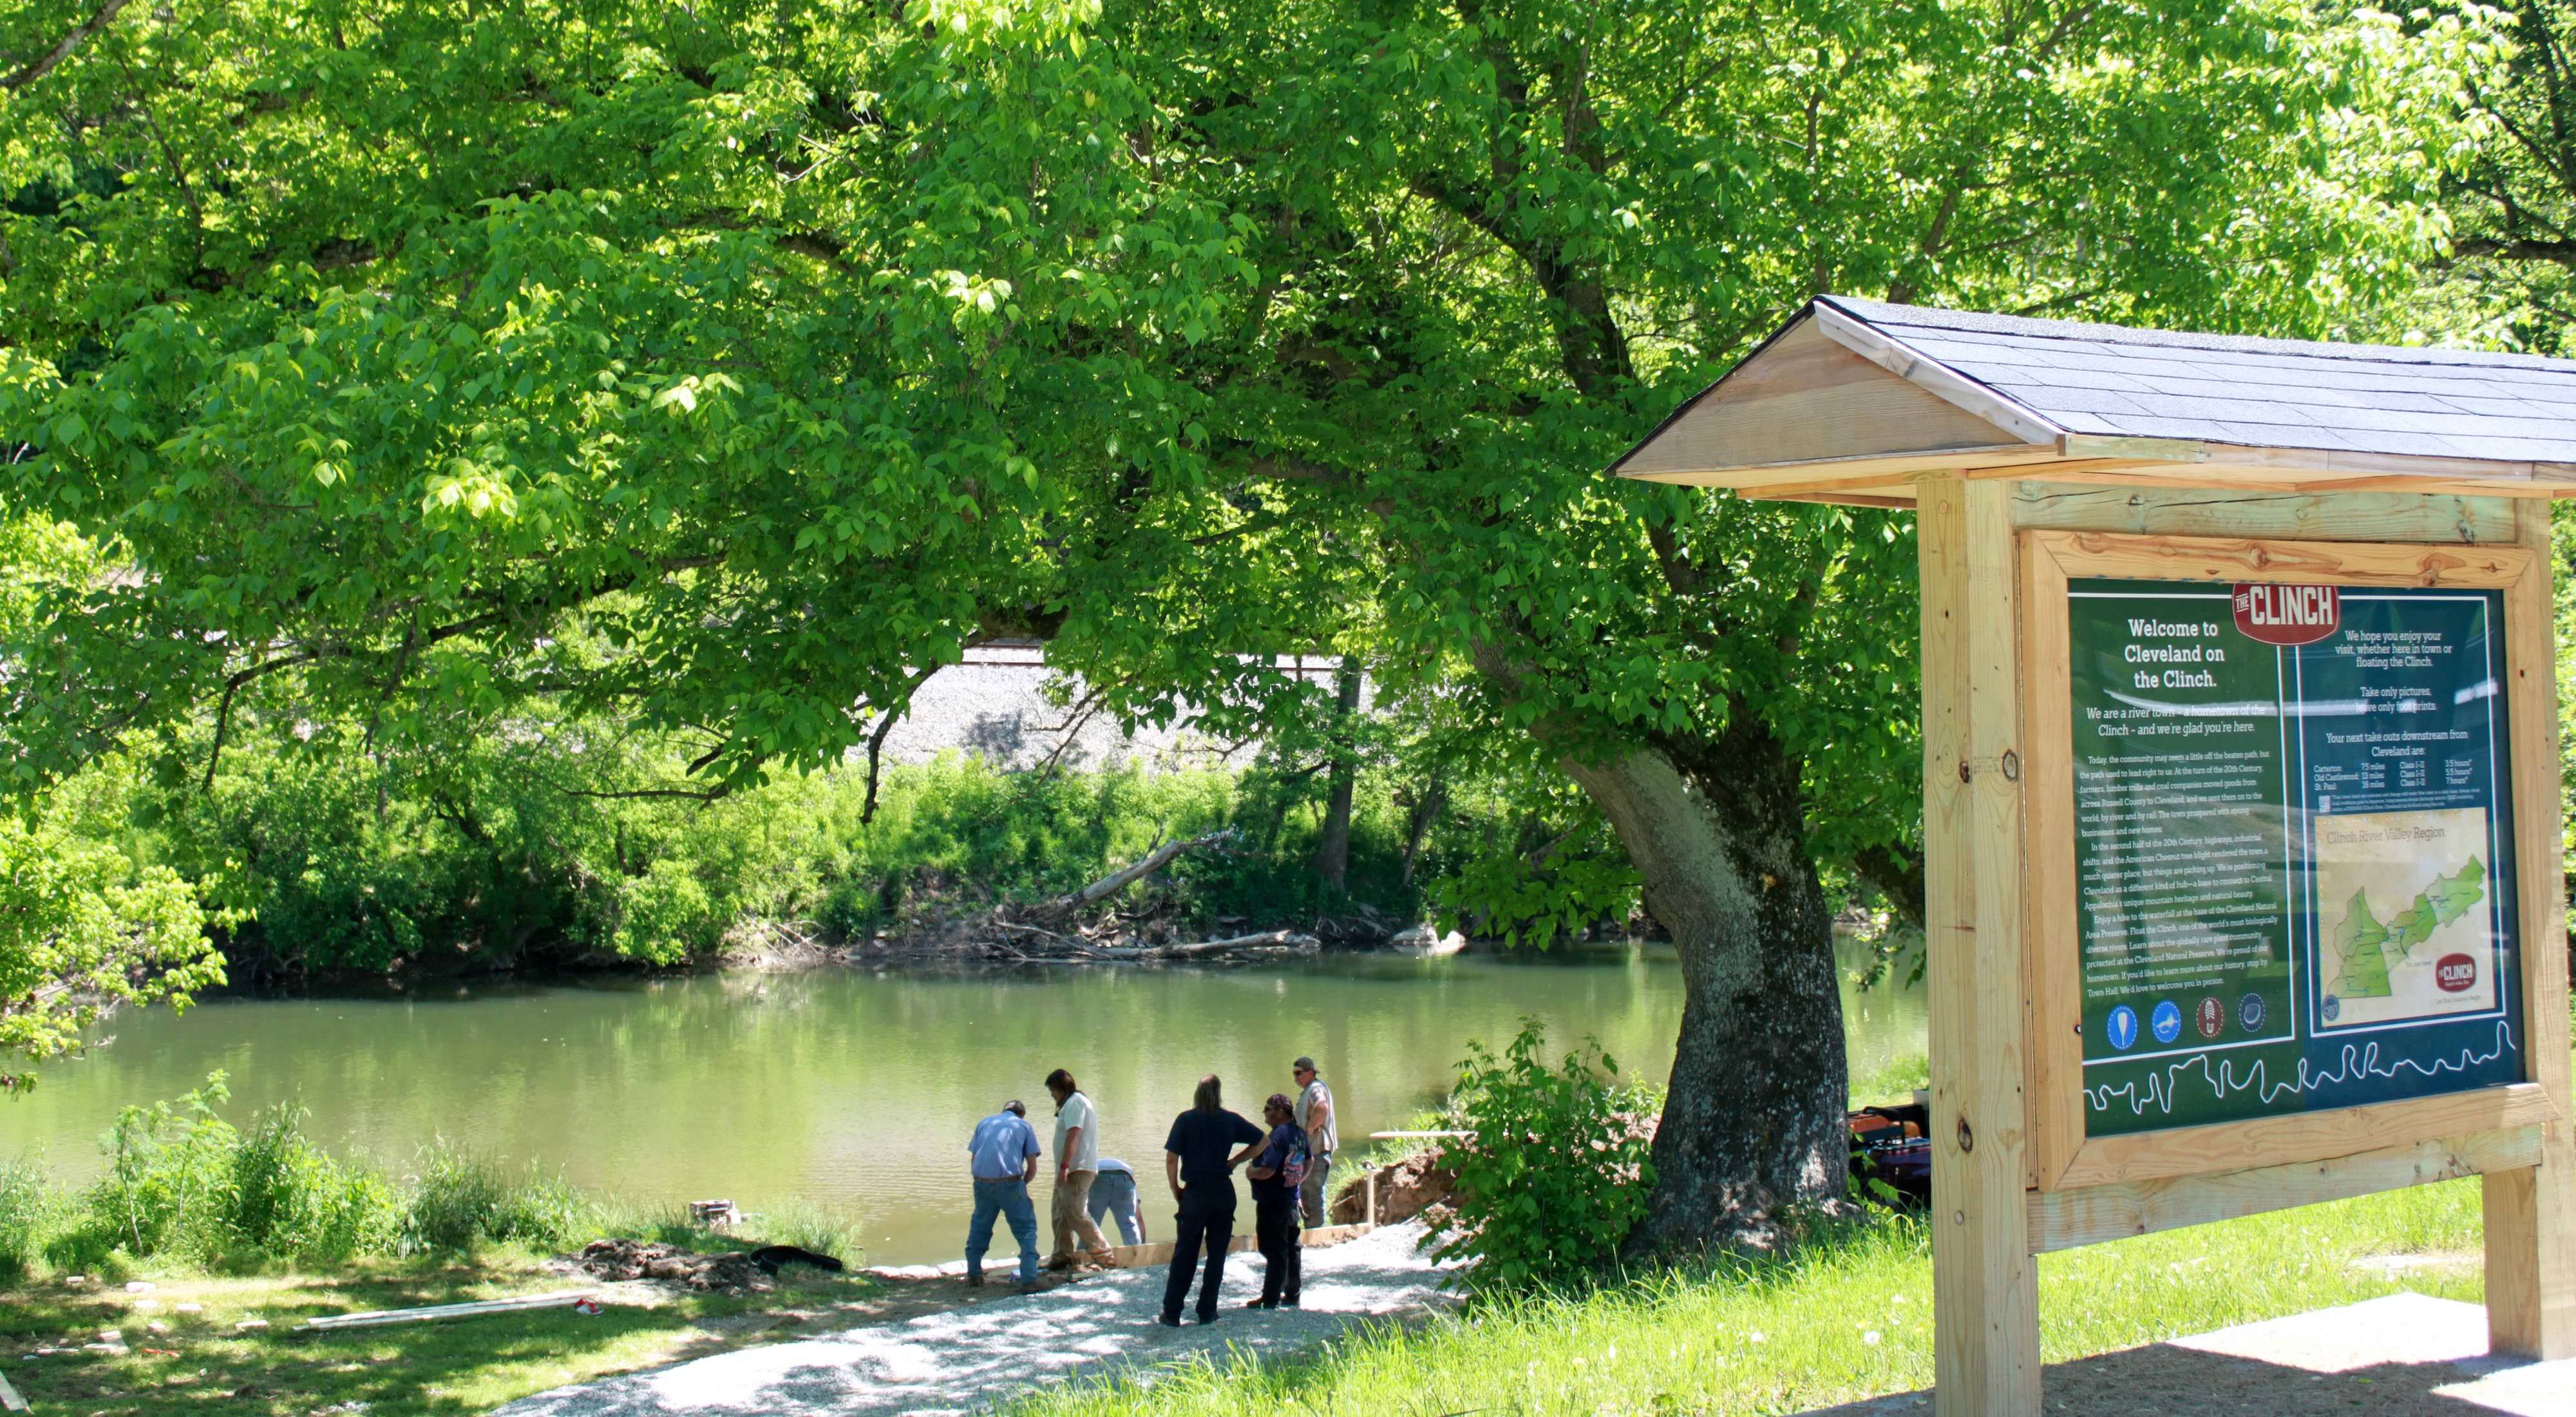 Six people stand at the edge of a tree lined river, inspecting an area where a canoe launch is being built. A large information kiosk in the foreground provides information about the river.